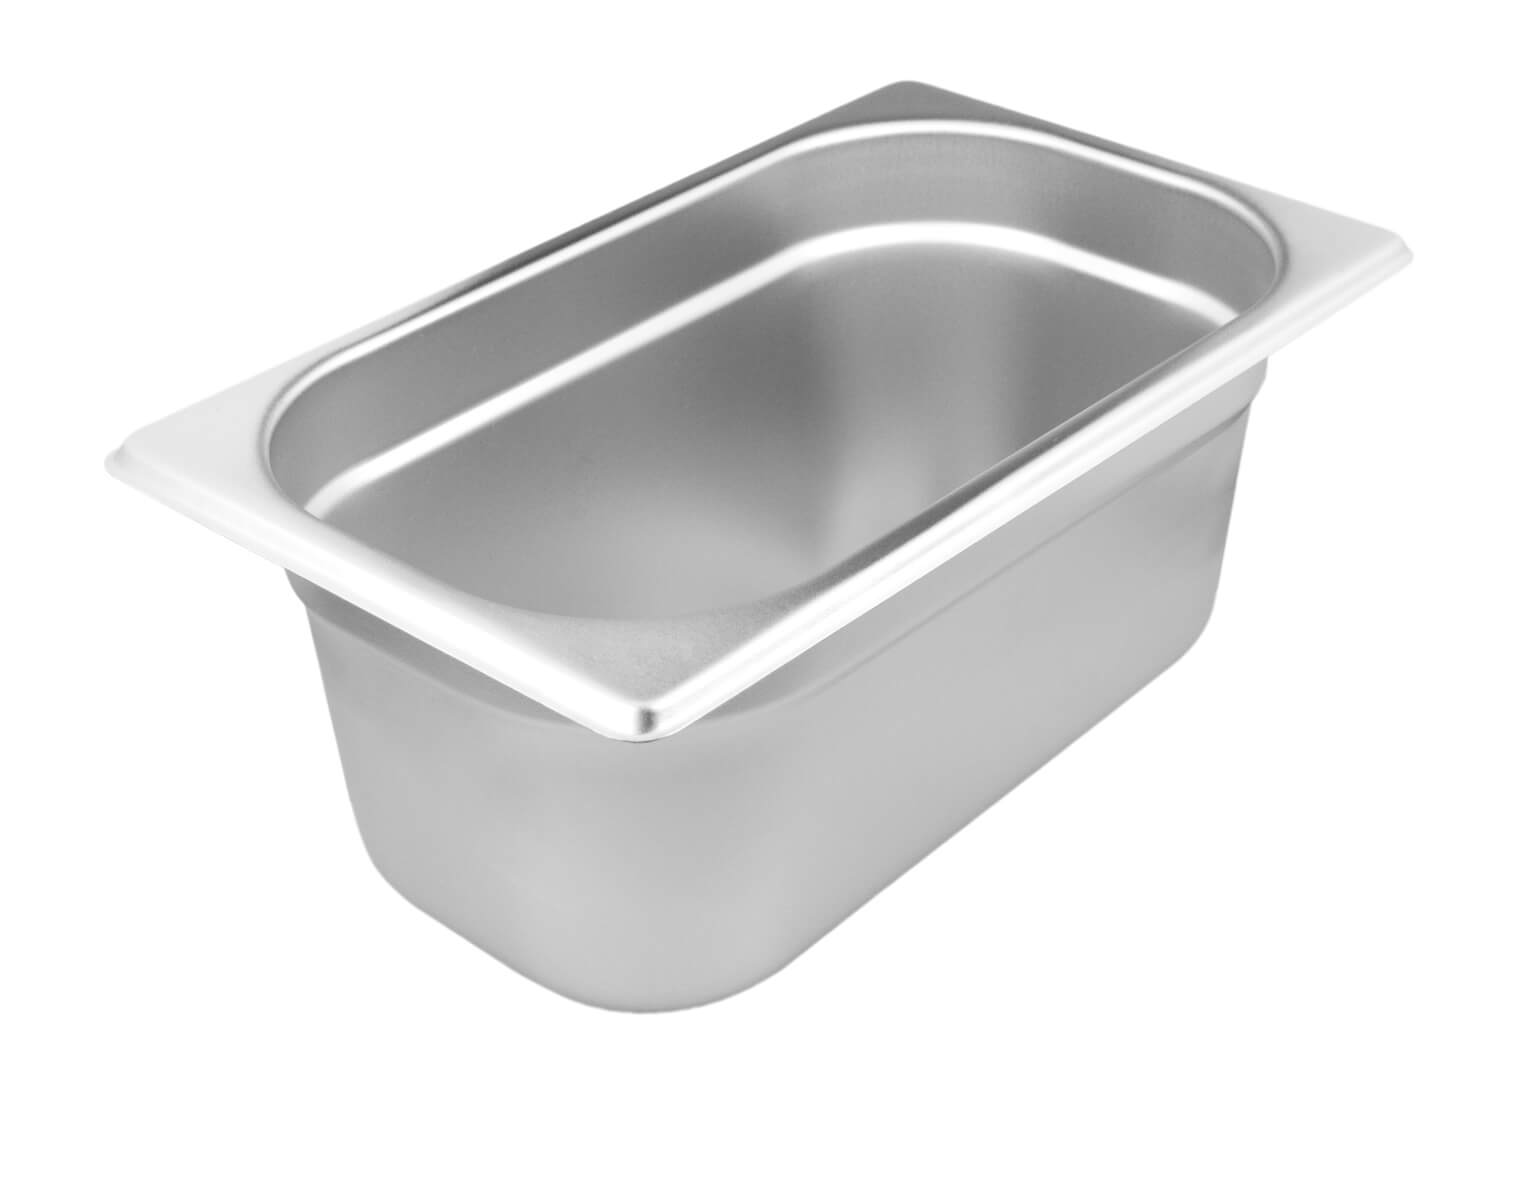 Gastronomy-standard container 65mm depth - stainless steel (GN 1/4)